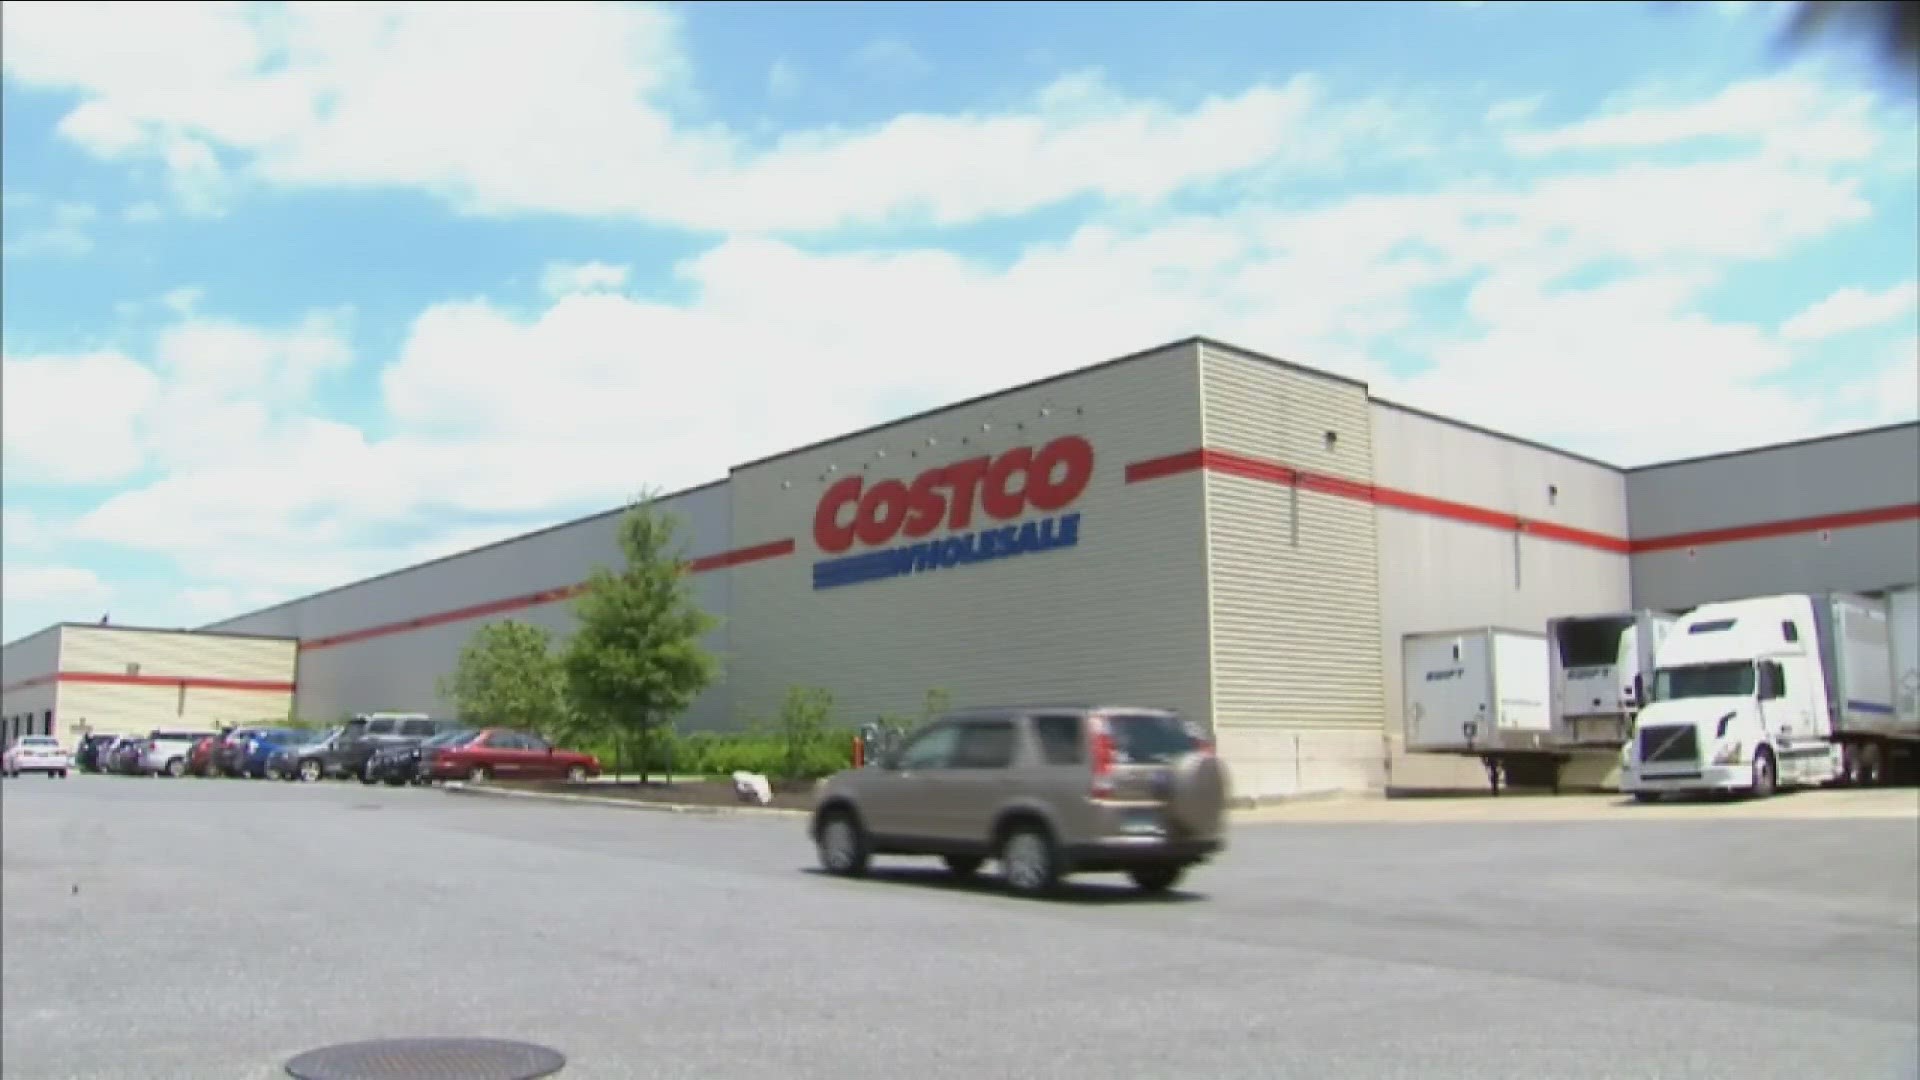 Traffic study for future Costco in Amherst complete